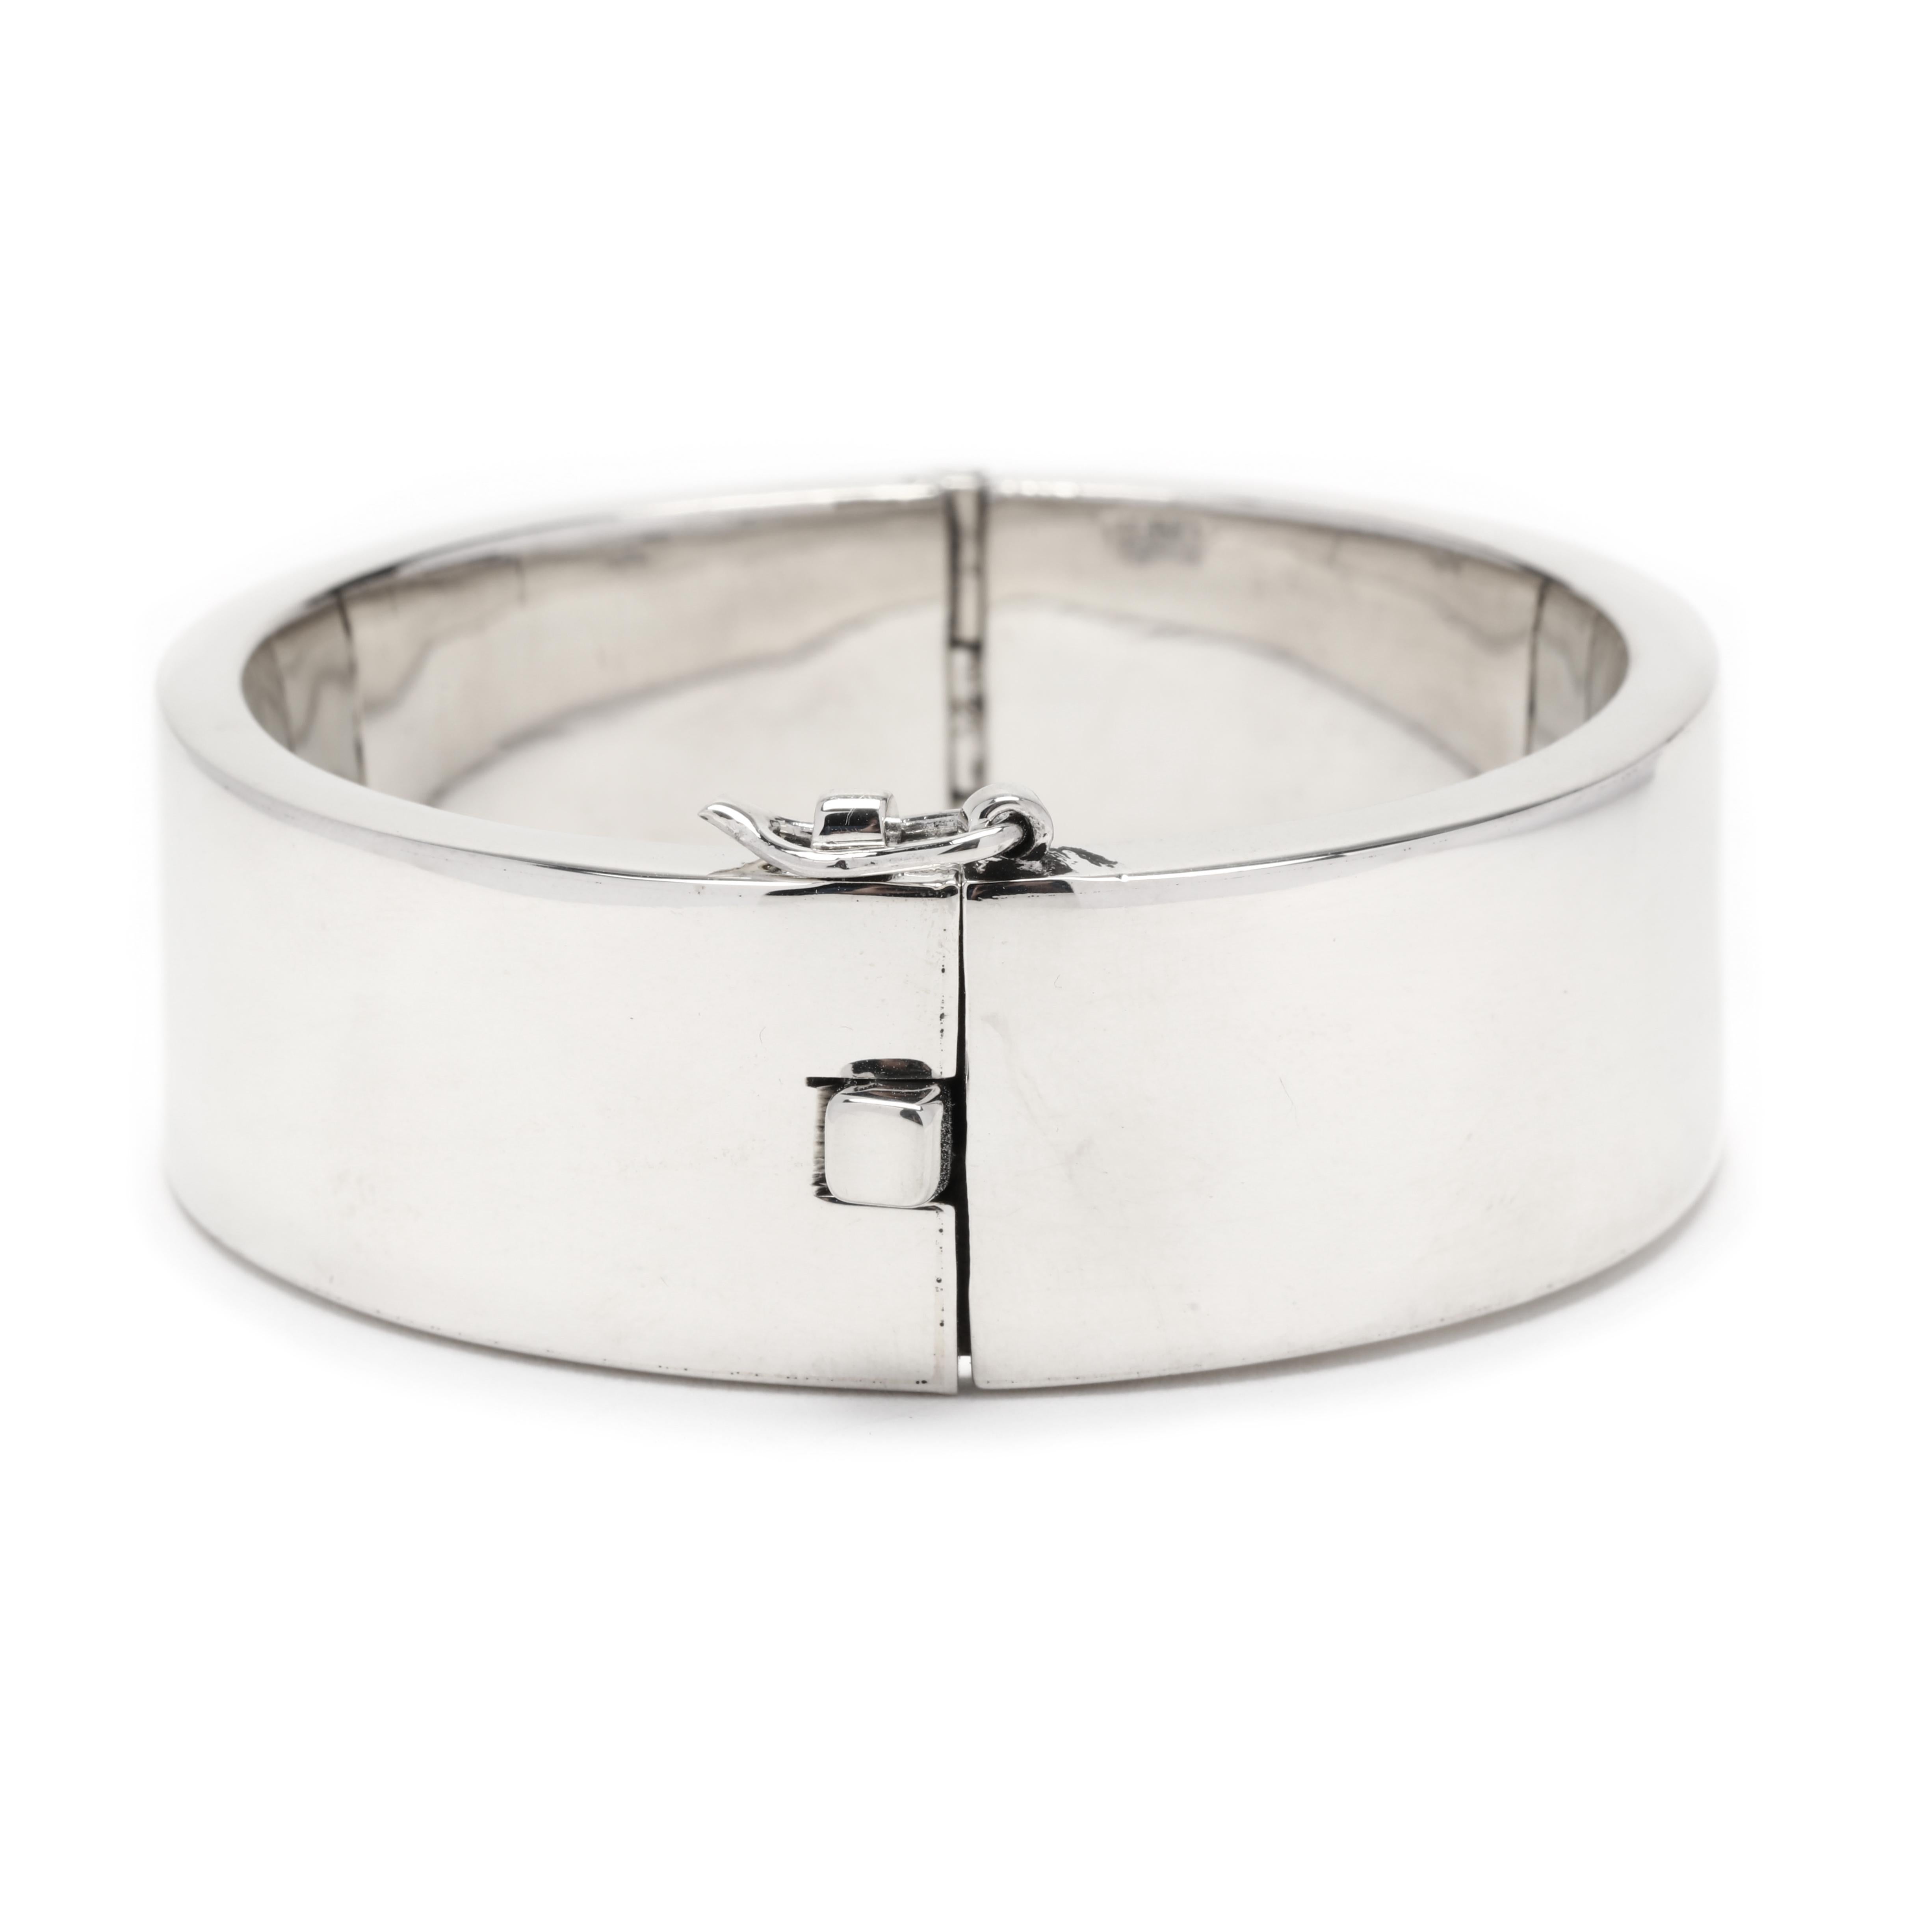 This sterling silver Mexican Escorcia Wide Hinged Bangle Bracelet is a timeless and classic piece that will never go out of style. It's 7 inches in length, making it the perfect size for everyday wear. The simple and plain design of this bangle